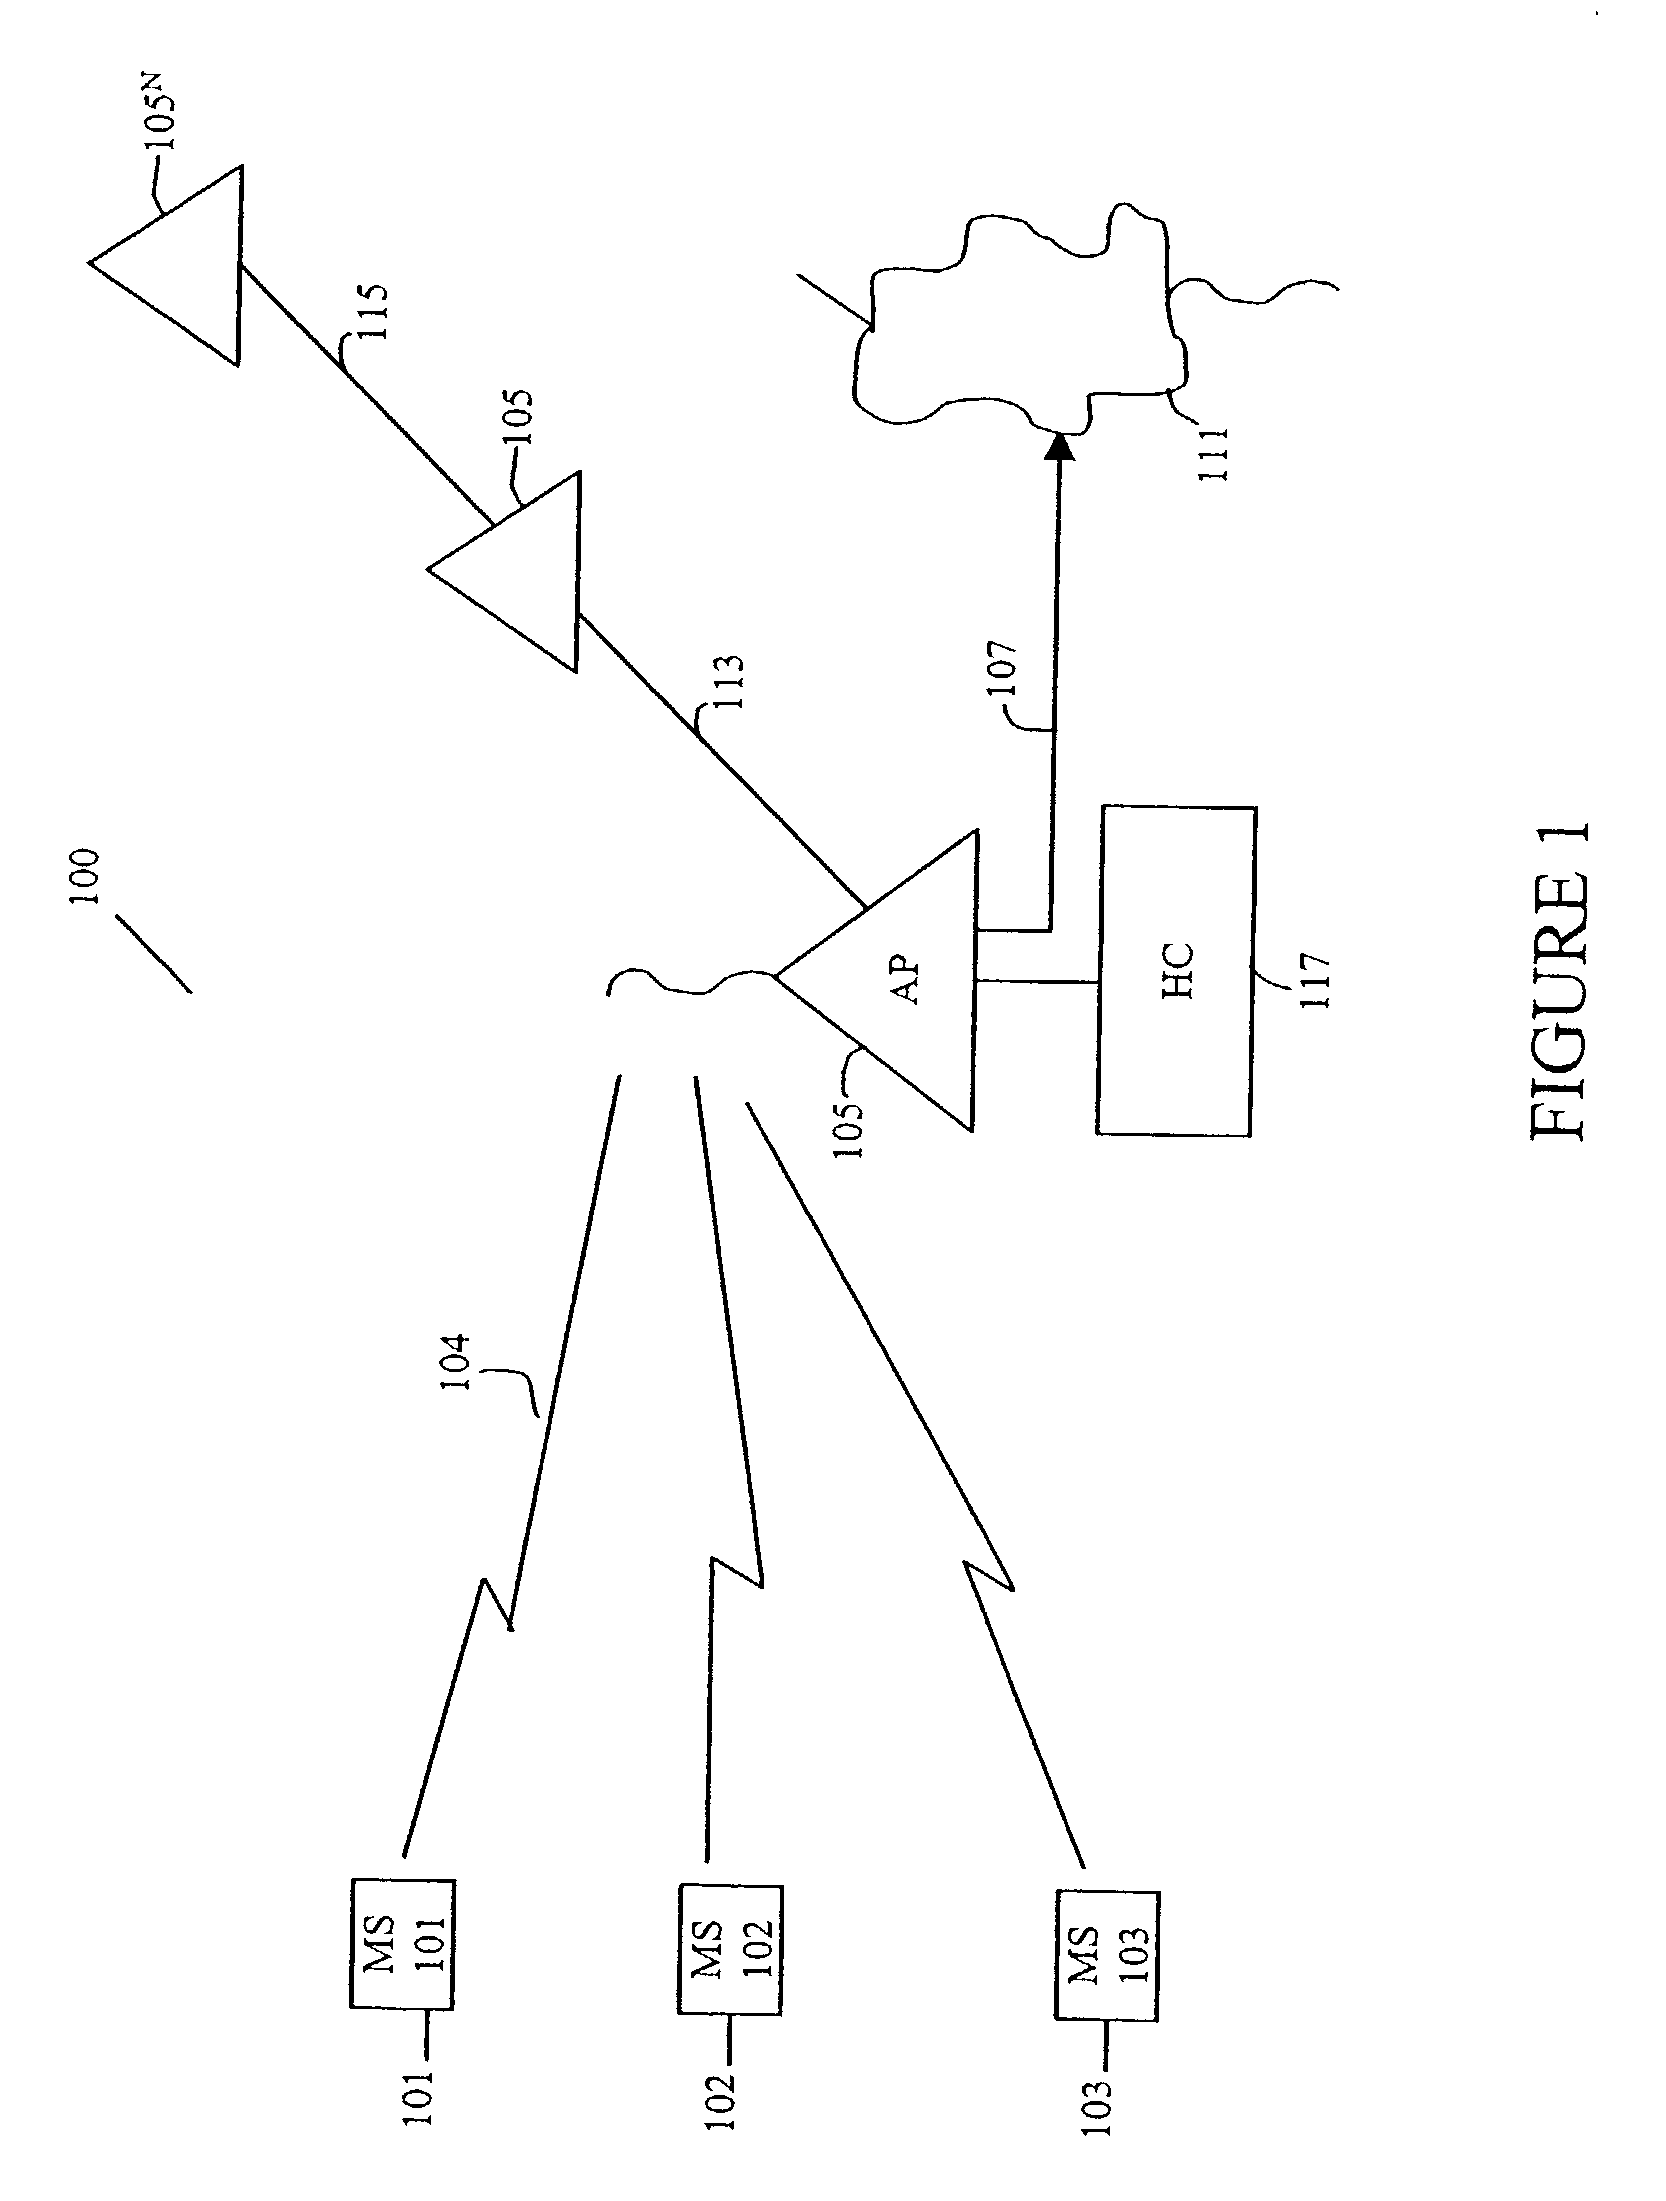 Method and system for optimally serving stations on wireless LANs using a controlled contention/resource reservation protocol of the IEEE 802.11e standard